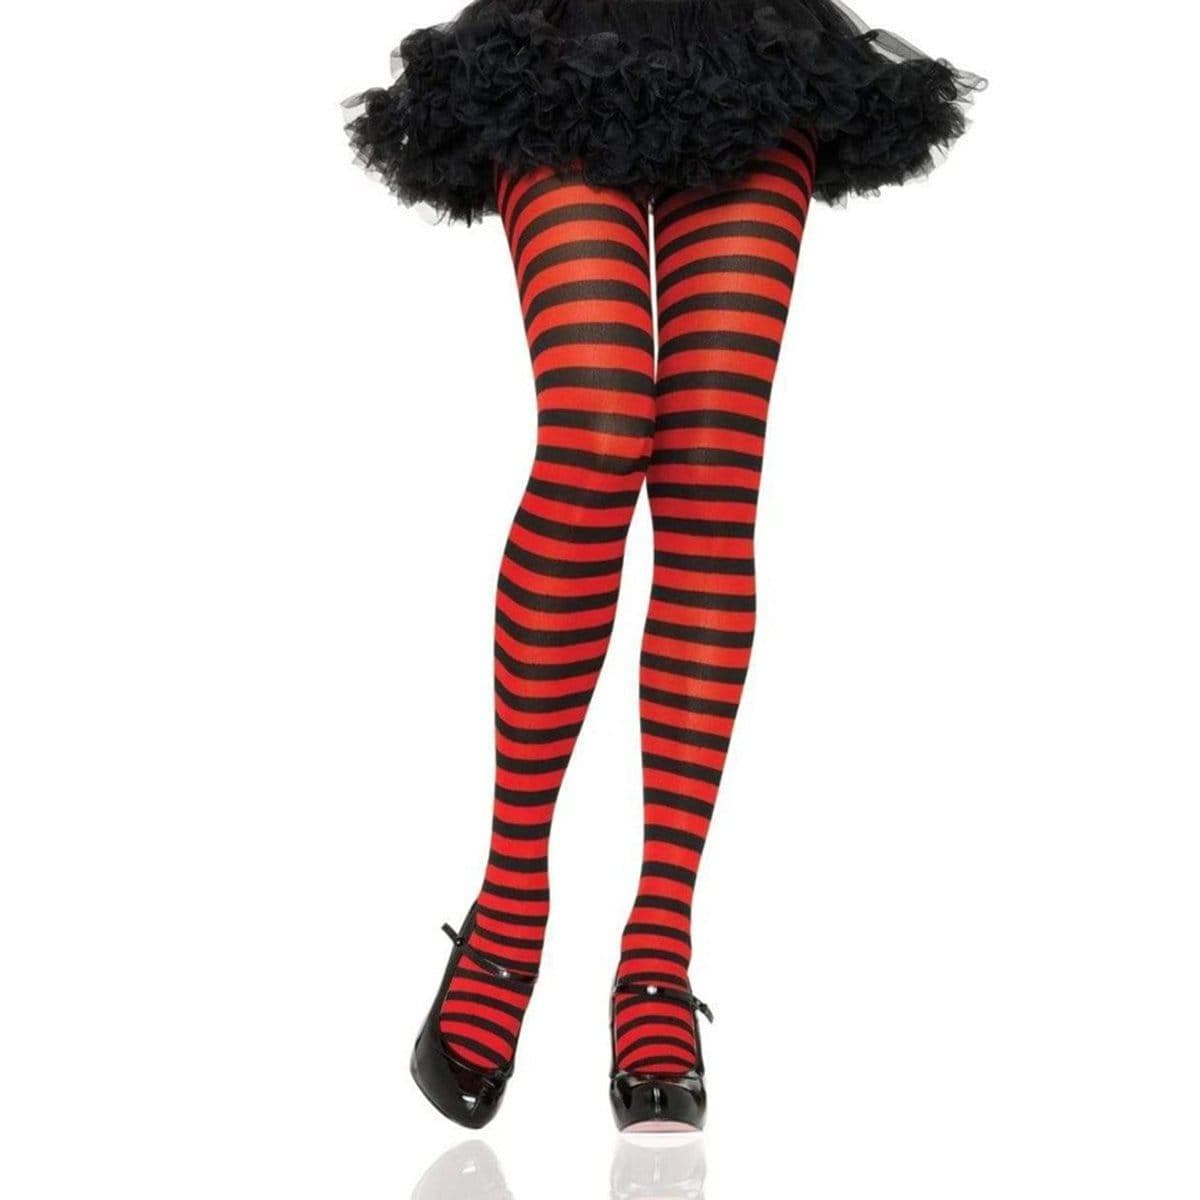 Black & Red Striped Tights for Women